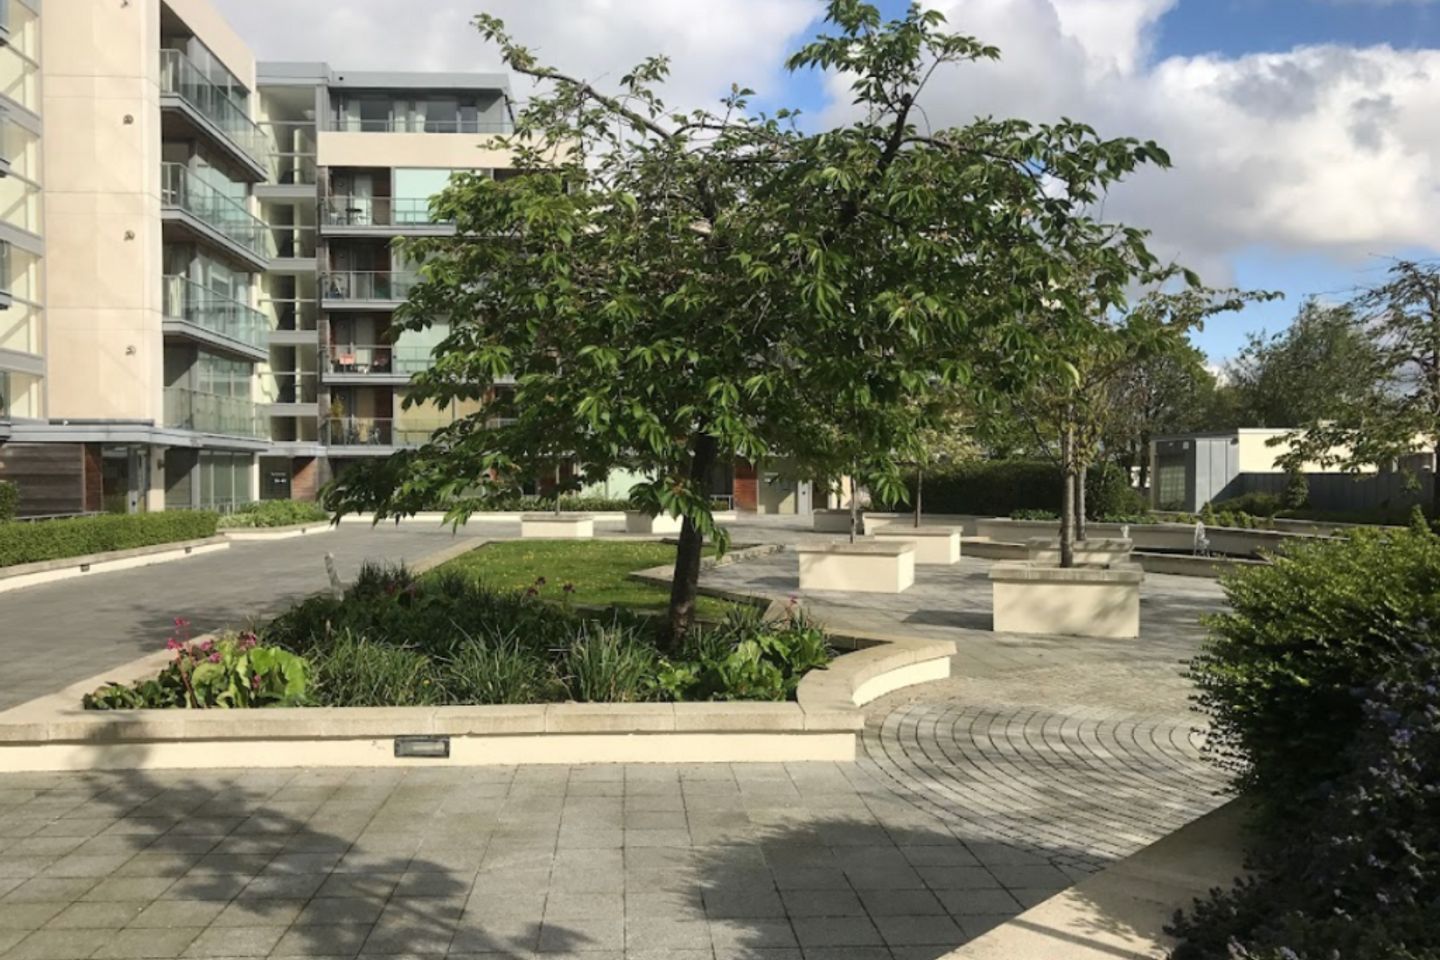 Apartment 19, Lapwing, Booterstown, Co. Dublin, A94NY75